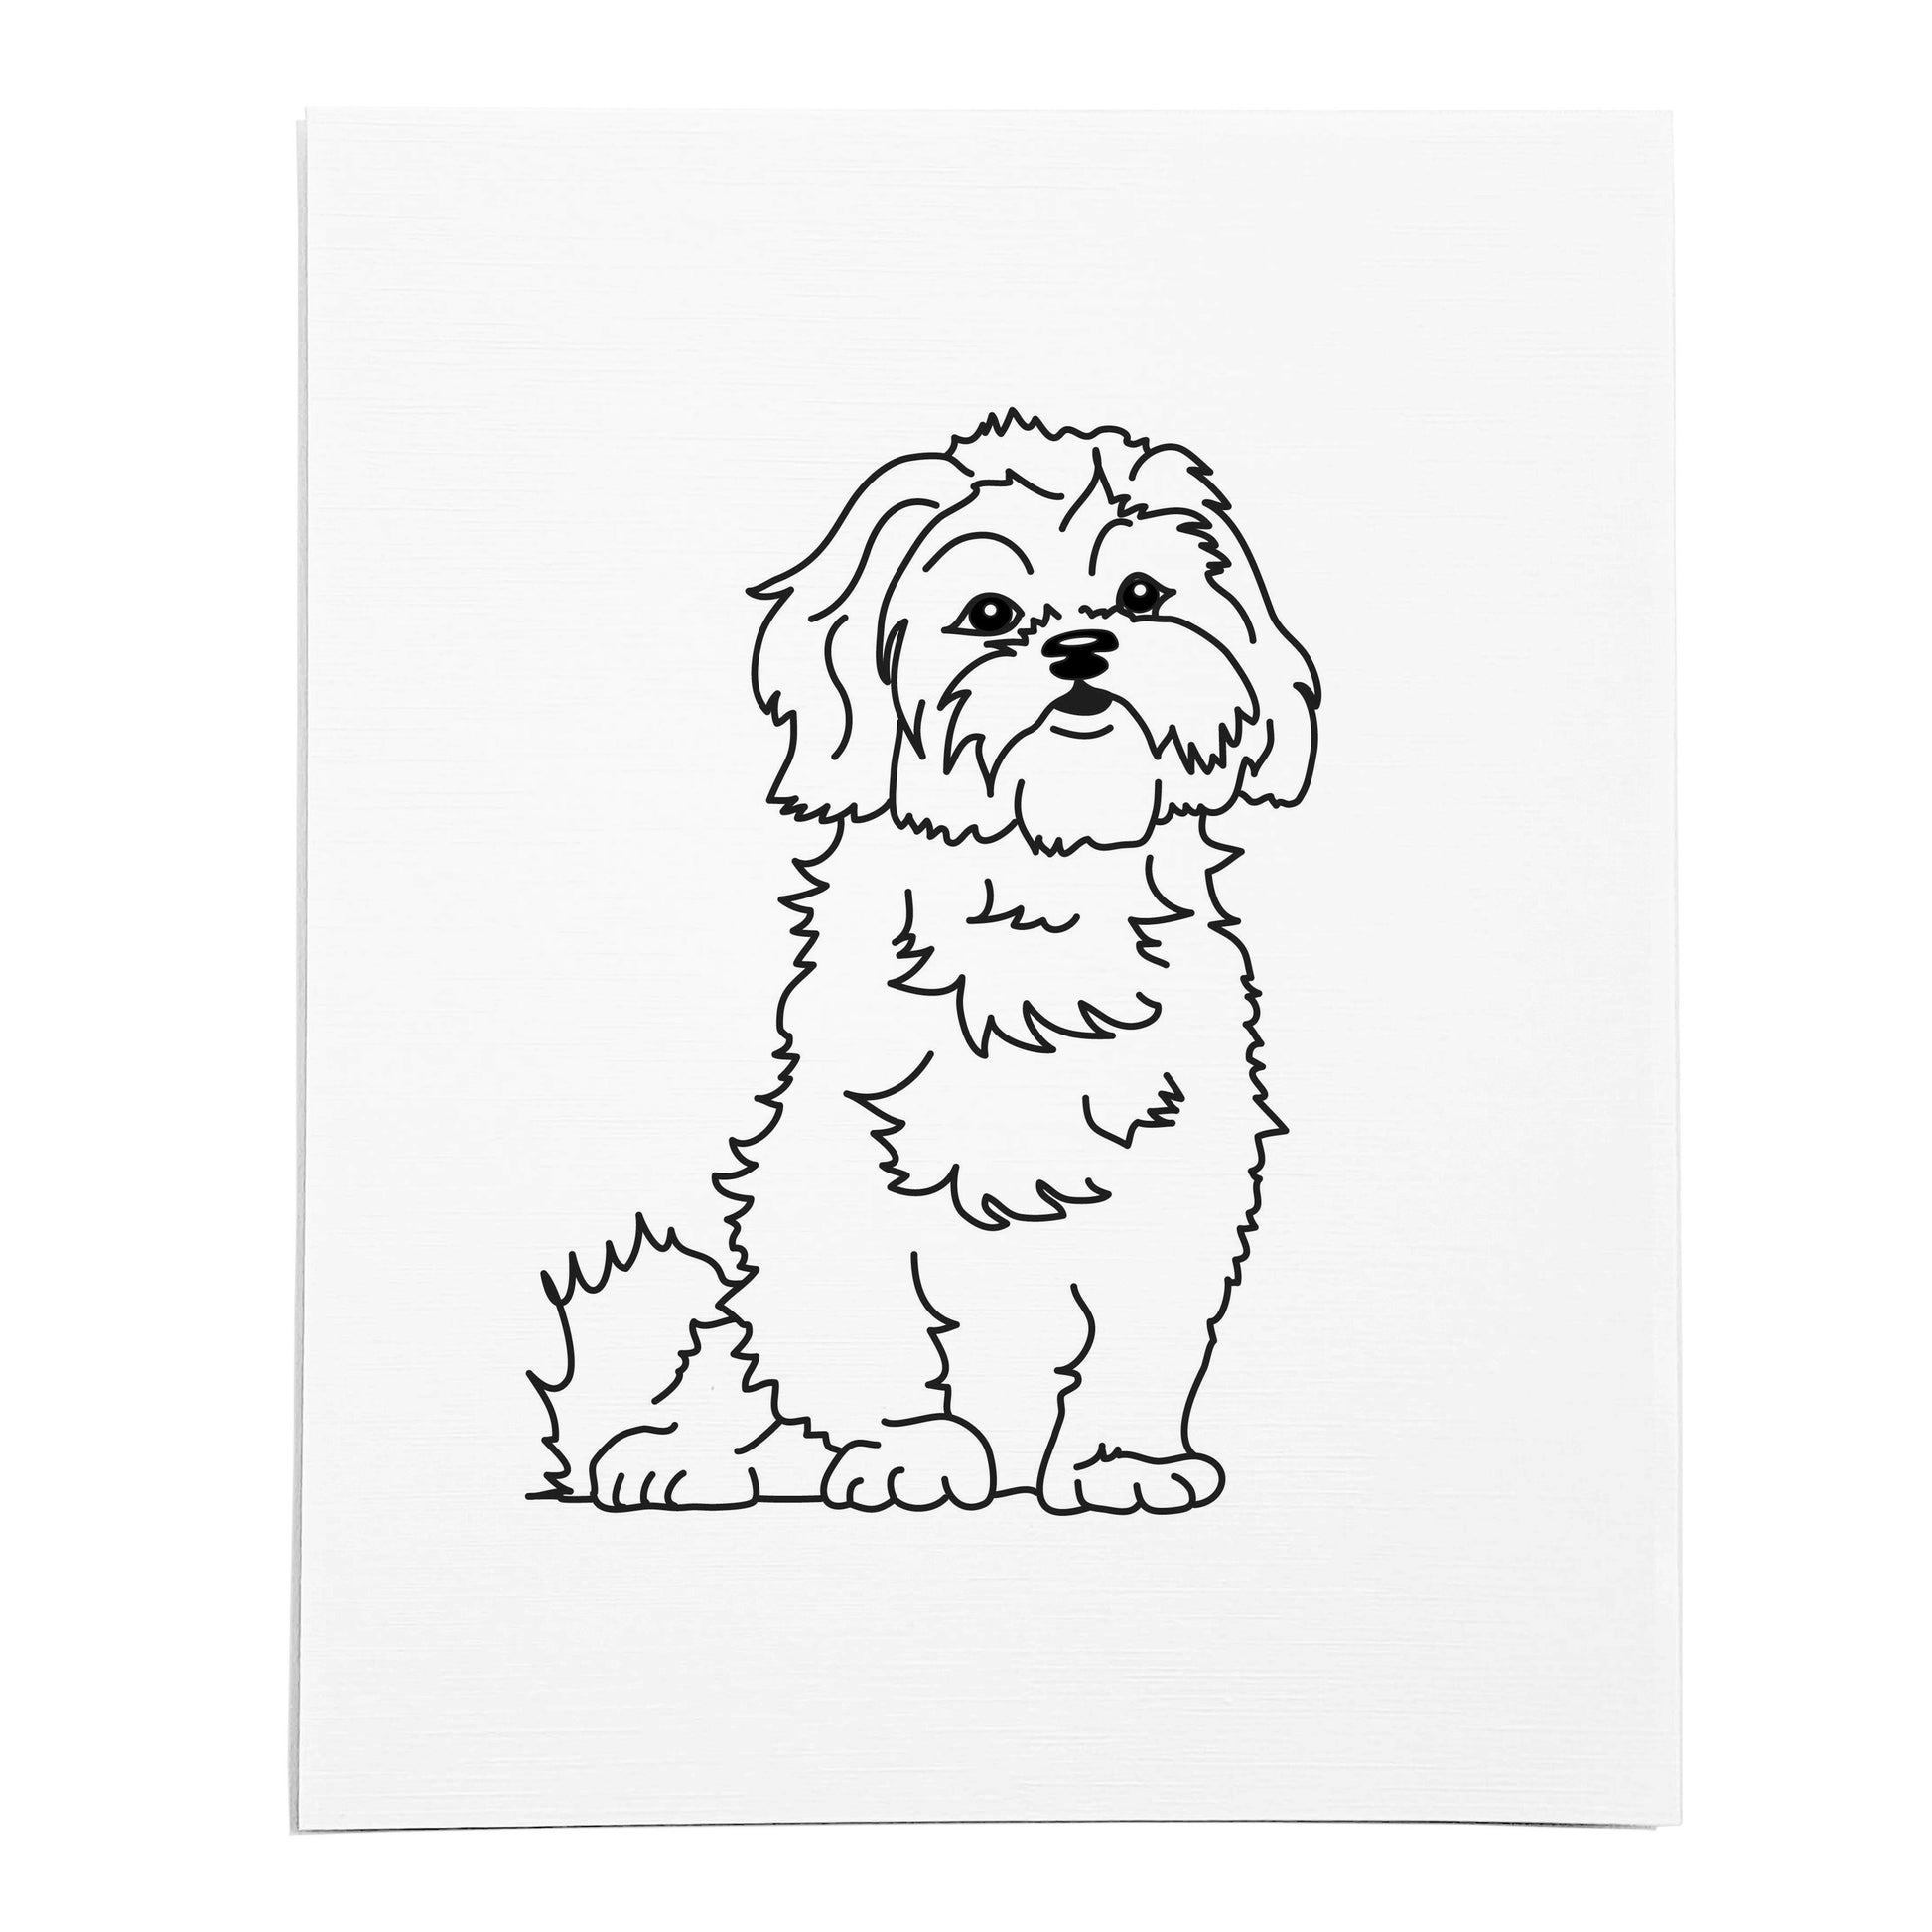 An art print featuring a line drawing of a Shih Tzu dog on white linen paper